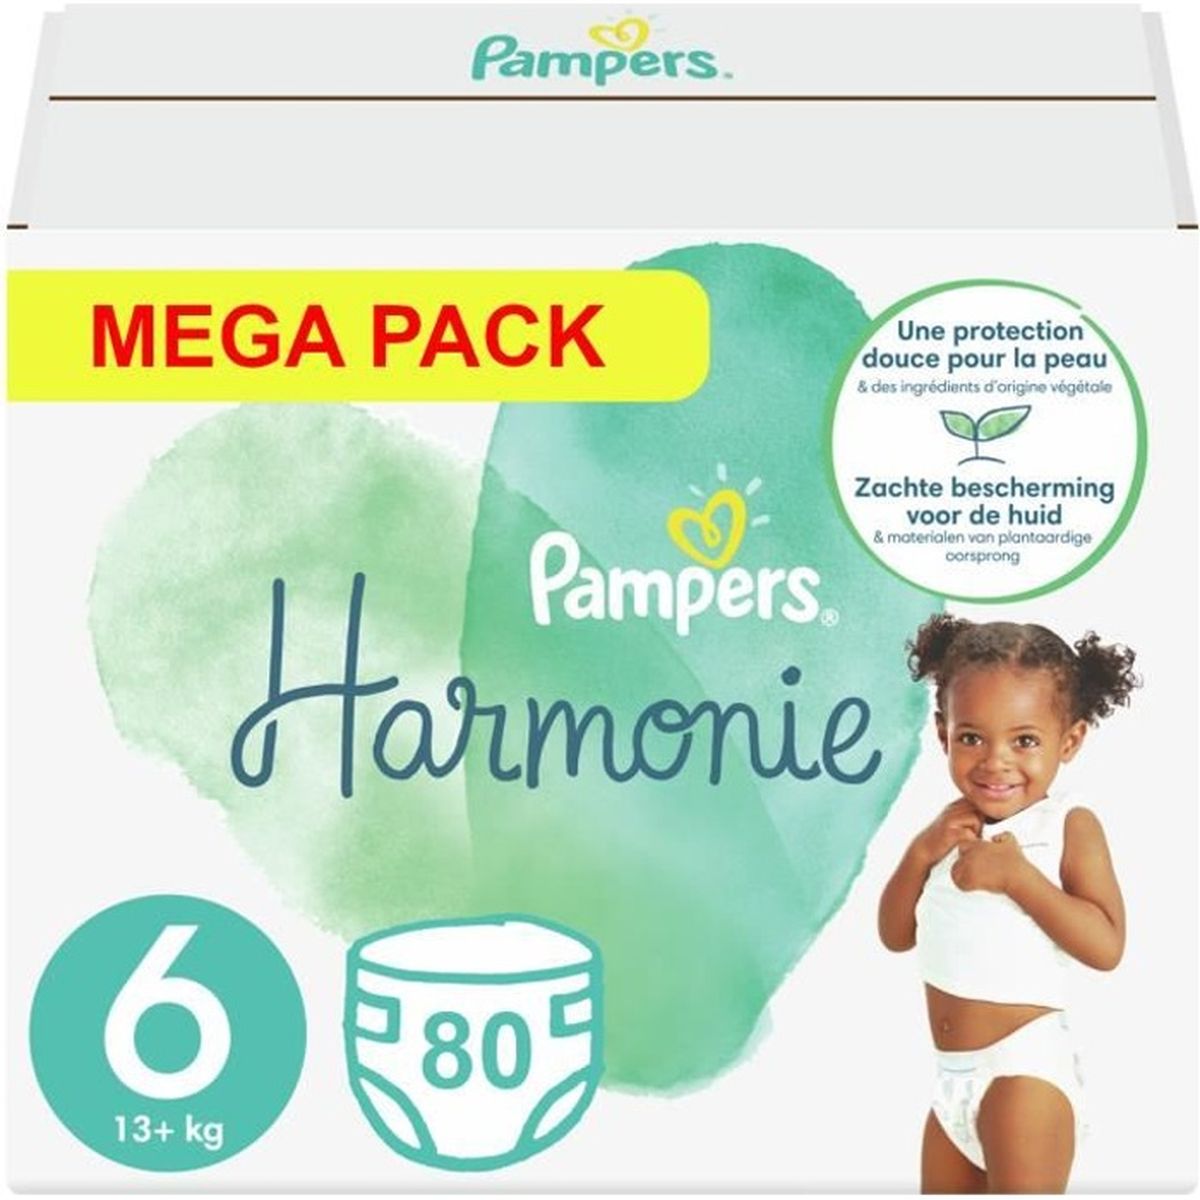 Couches Culottes Harmonie Nappy Pants Taille 5 12kg x20 Pampers